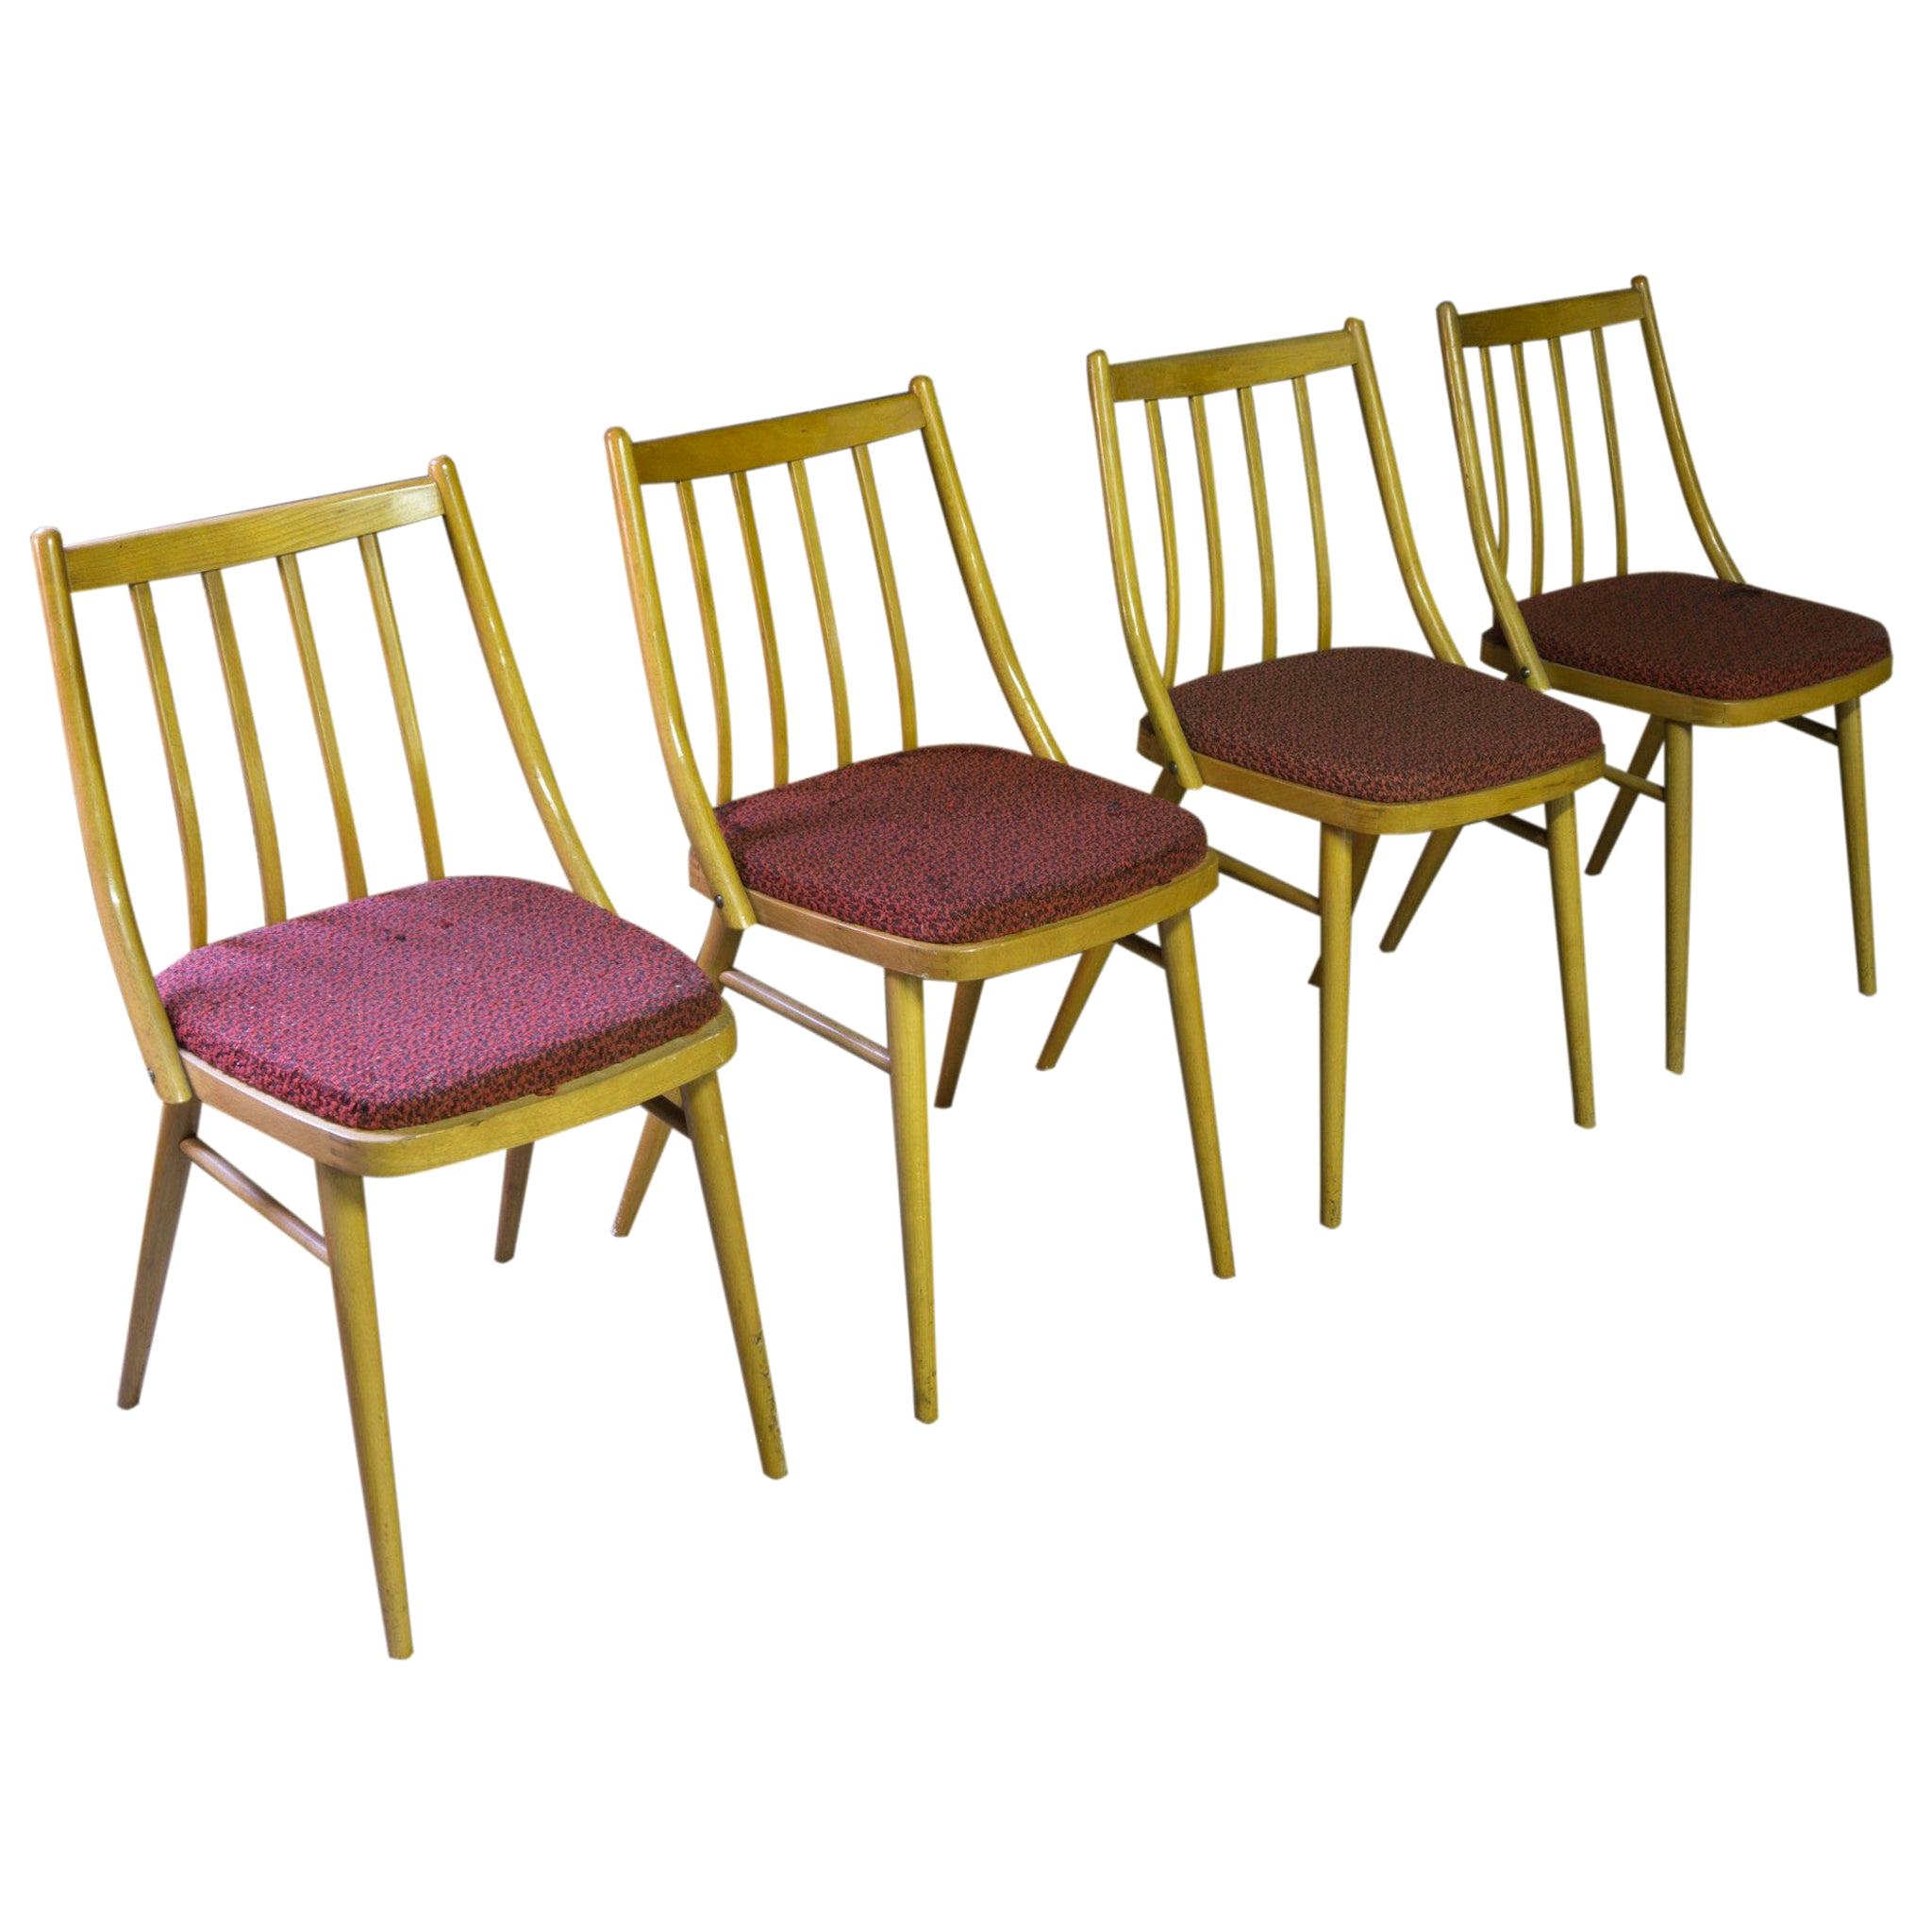 Set of Four Vintage Dining Chairs, TON, 1960s, Czechoslovakia For Sale